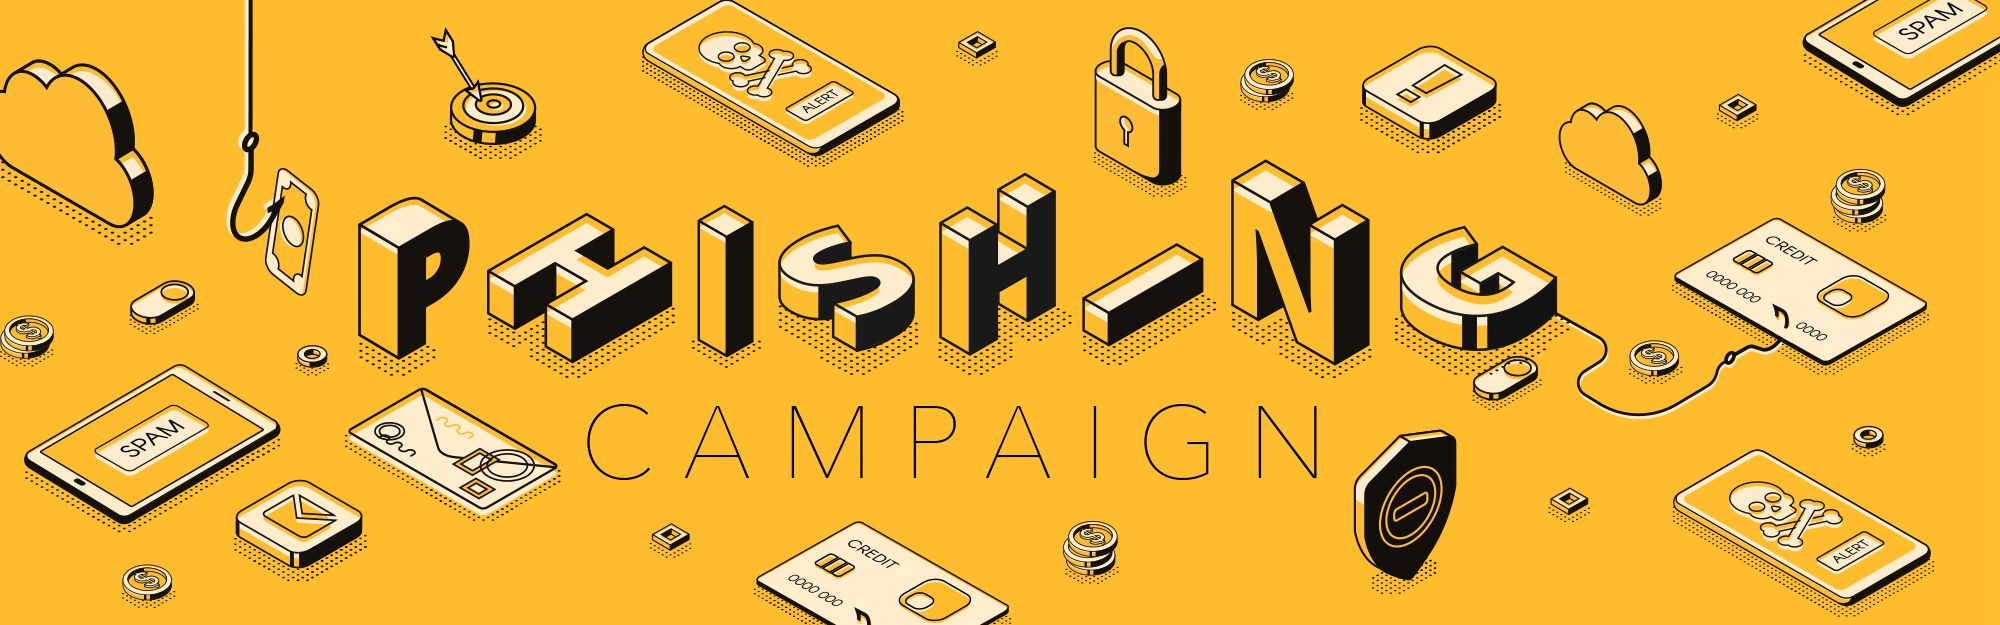 Simulated Phishing Campaign Banner